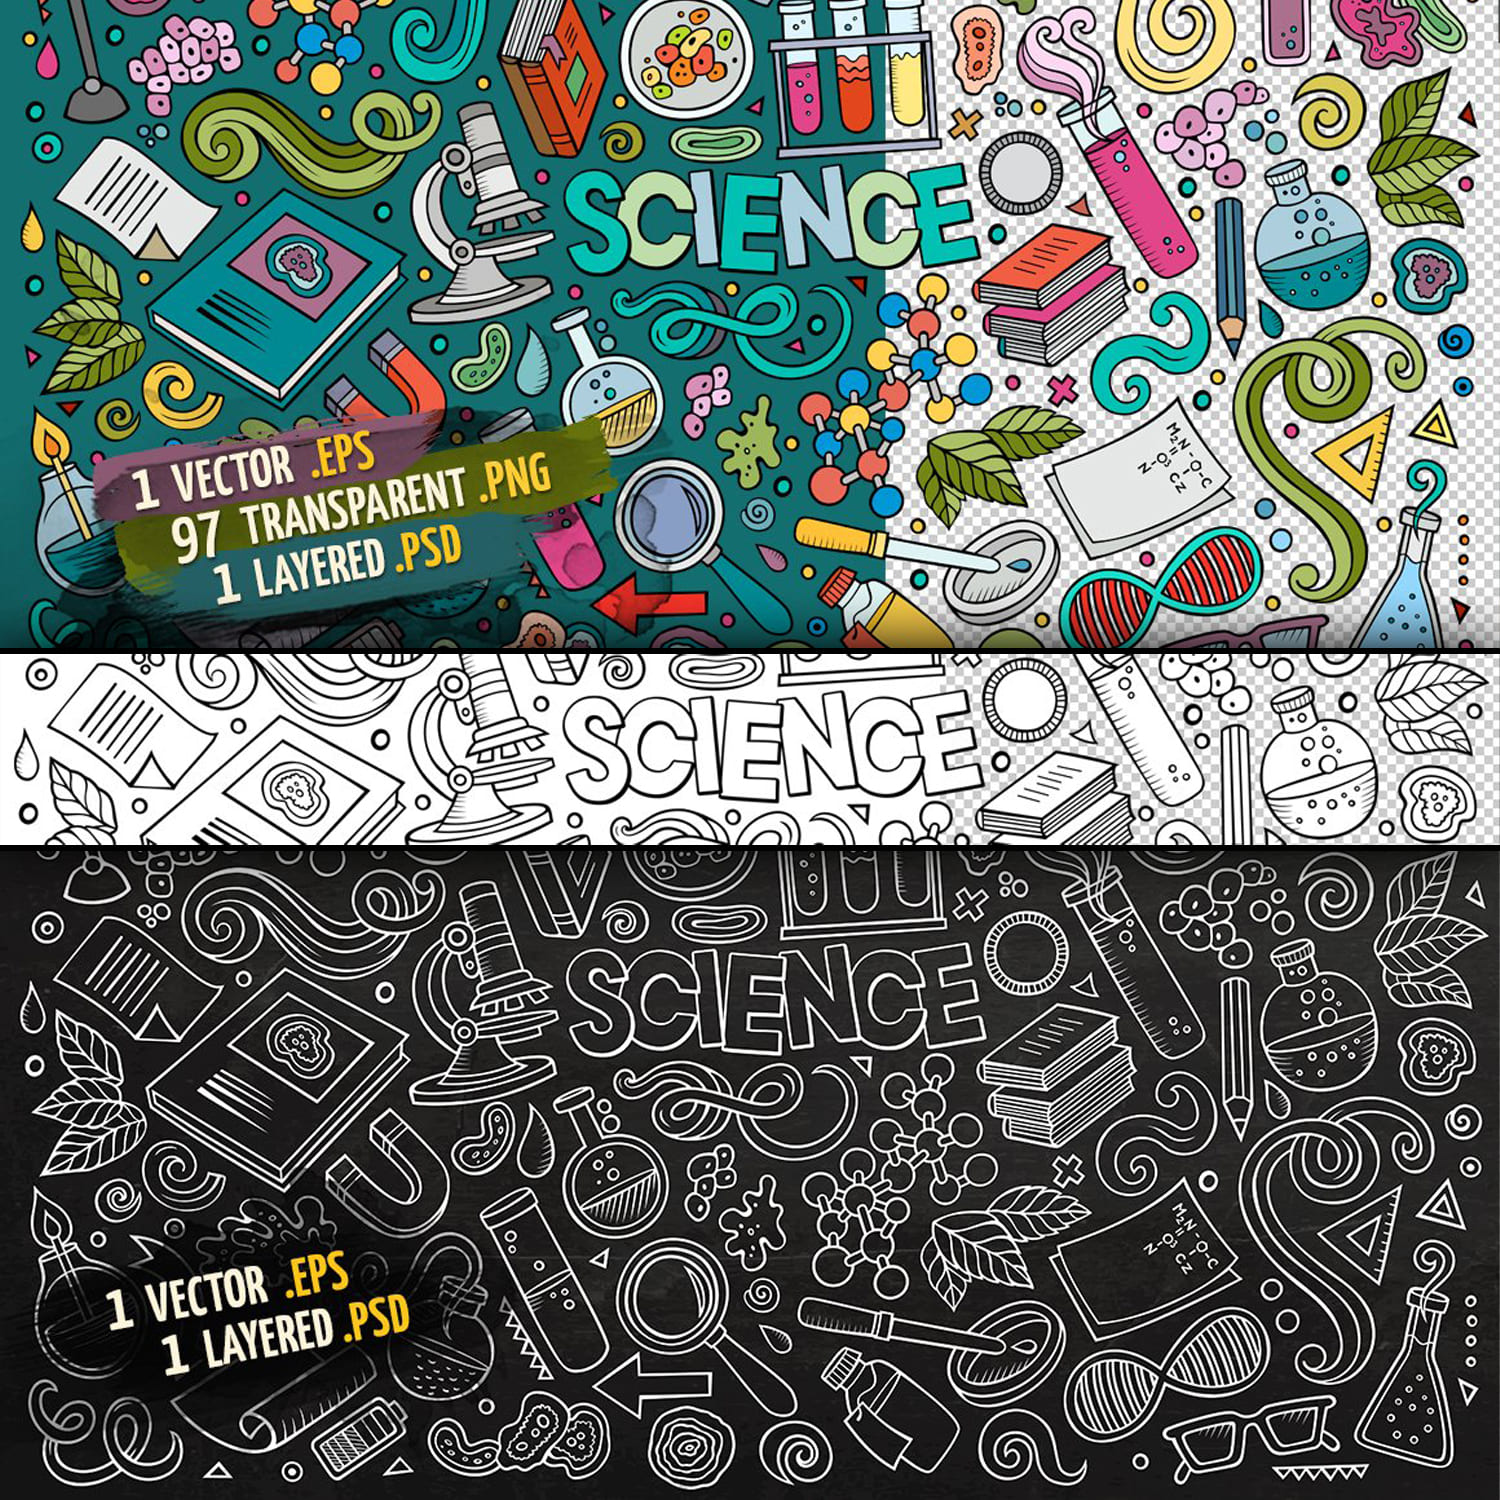 Science Objects Elements Set 1500 1500 2.